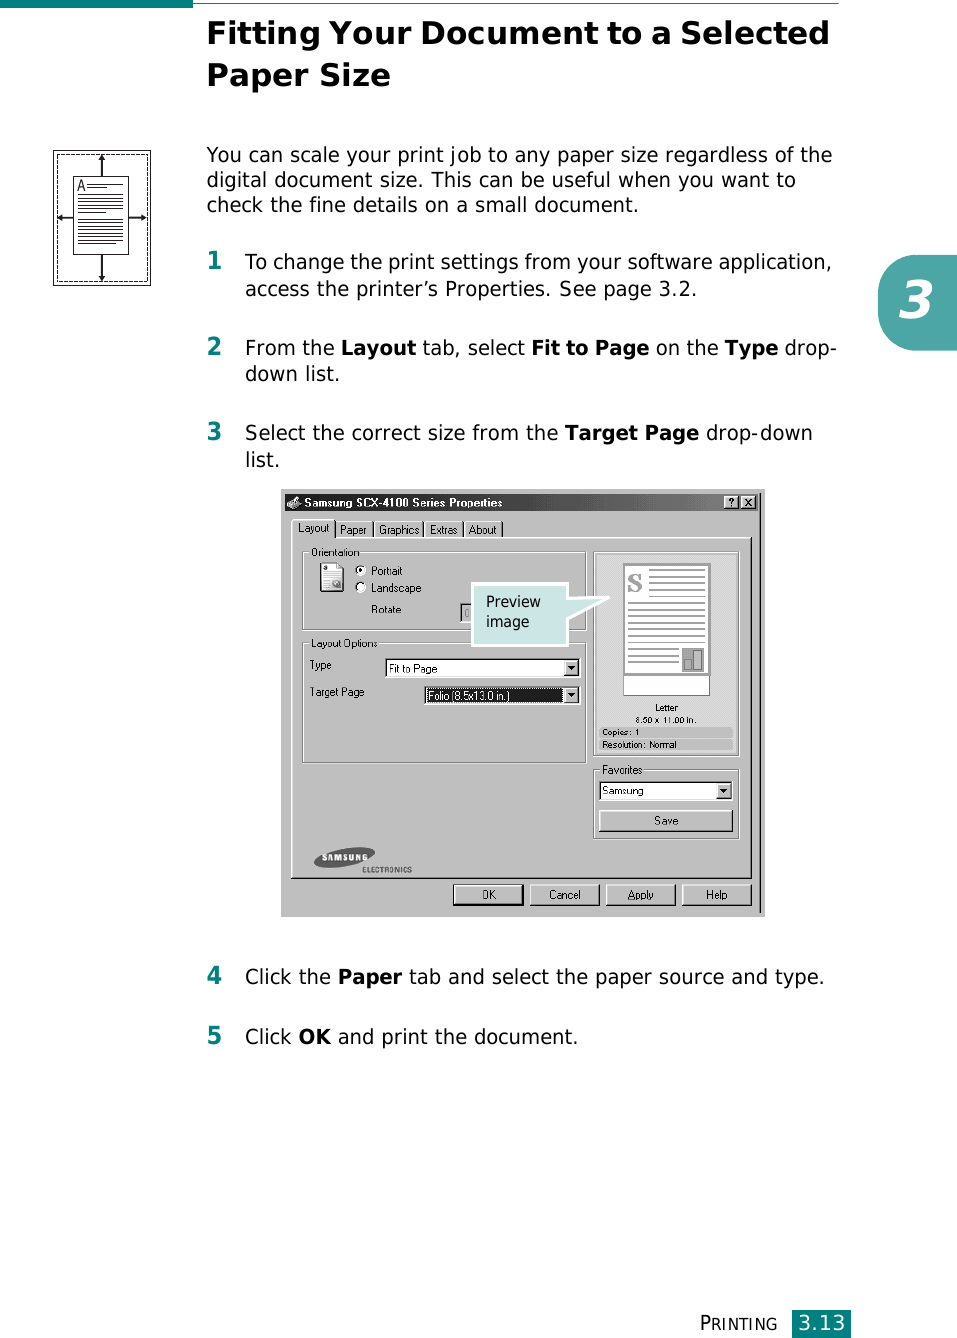 PRINTING3.133Fitting Your Document to a Selected Paper SizeYou can scale your print job to any paper size regardless of the digital document size. This can be useful when you want to check the fine details on a small document. 1To change the print settings from your software application, access the printer’s Properties. See page 3.2.2From the Layout tab, select Fit to Page on the Type drop-down list. 3Select the correct size from the Target Page drop-down list.4Click the Paper tab and select the paper source and type.5Click OK and print the document. APreview image